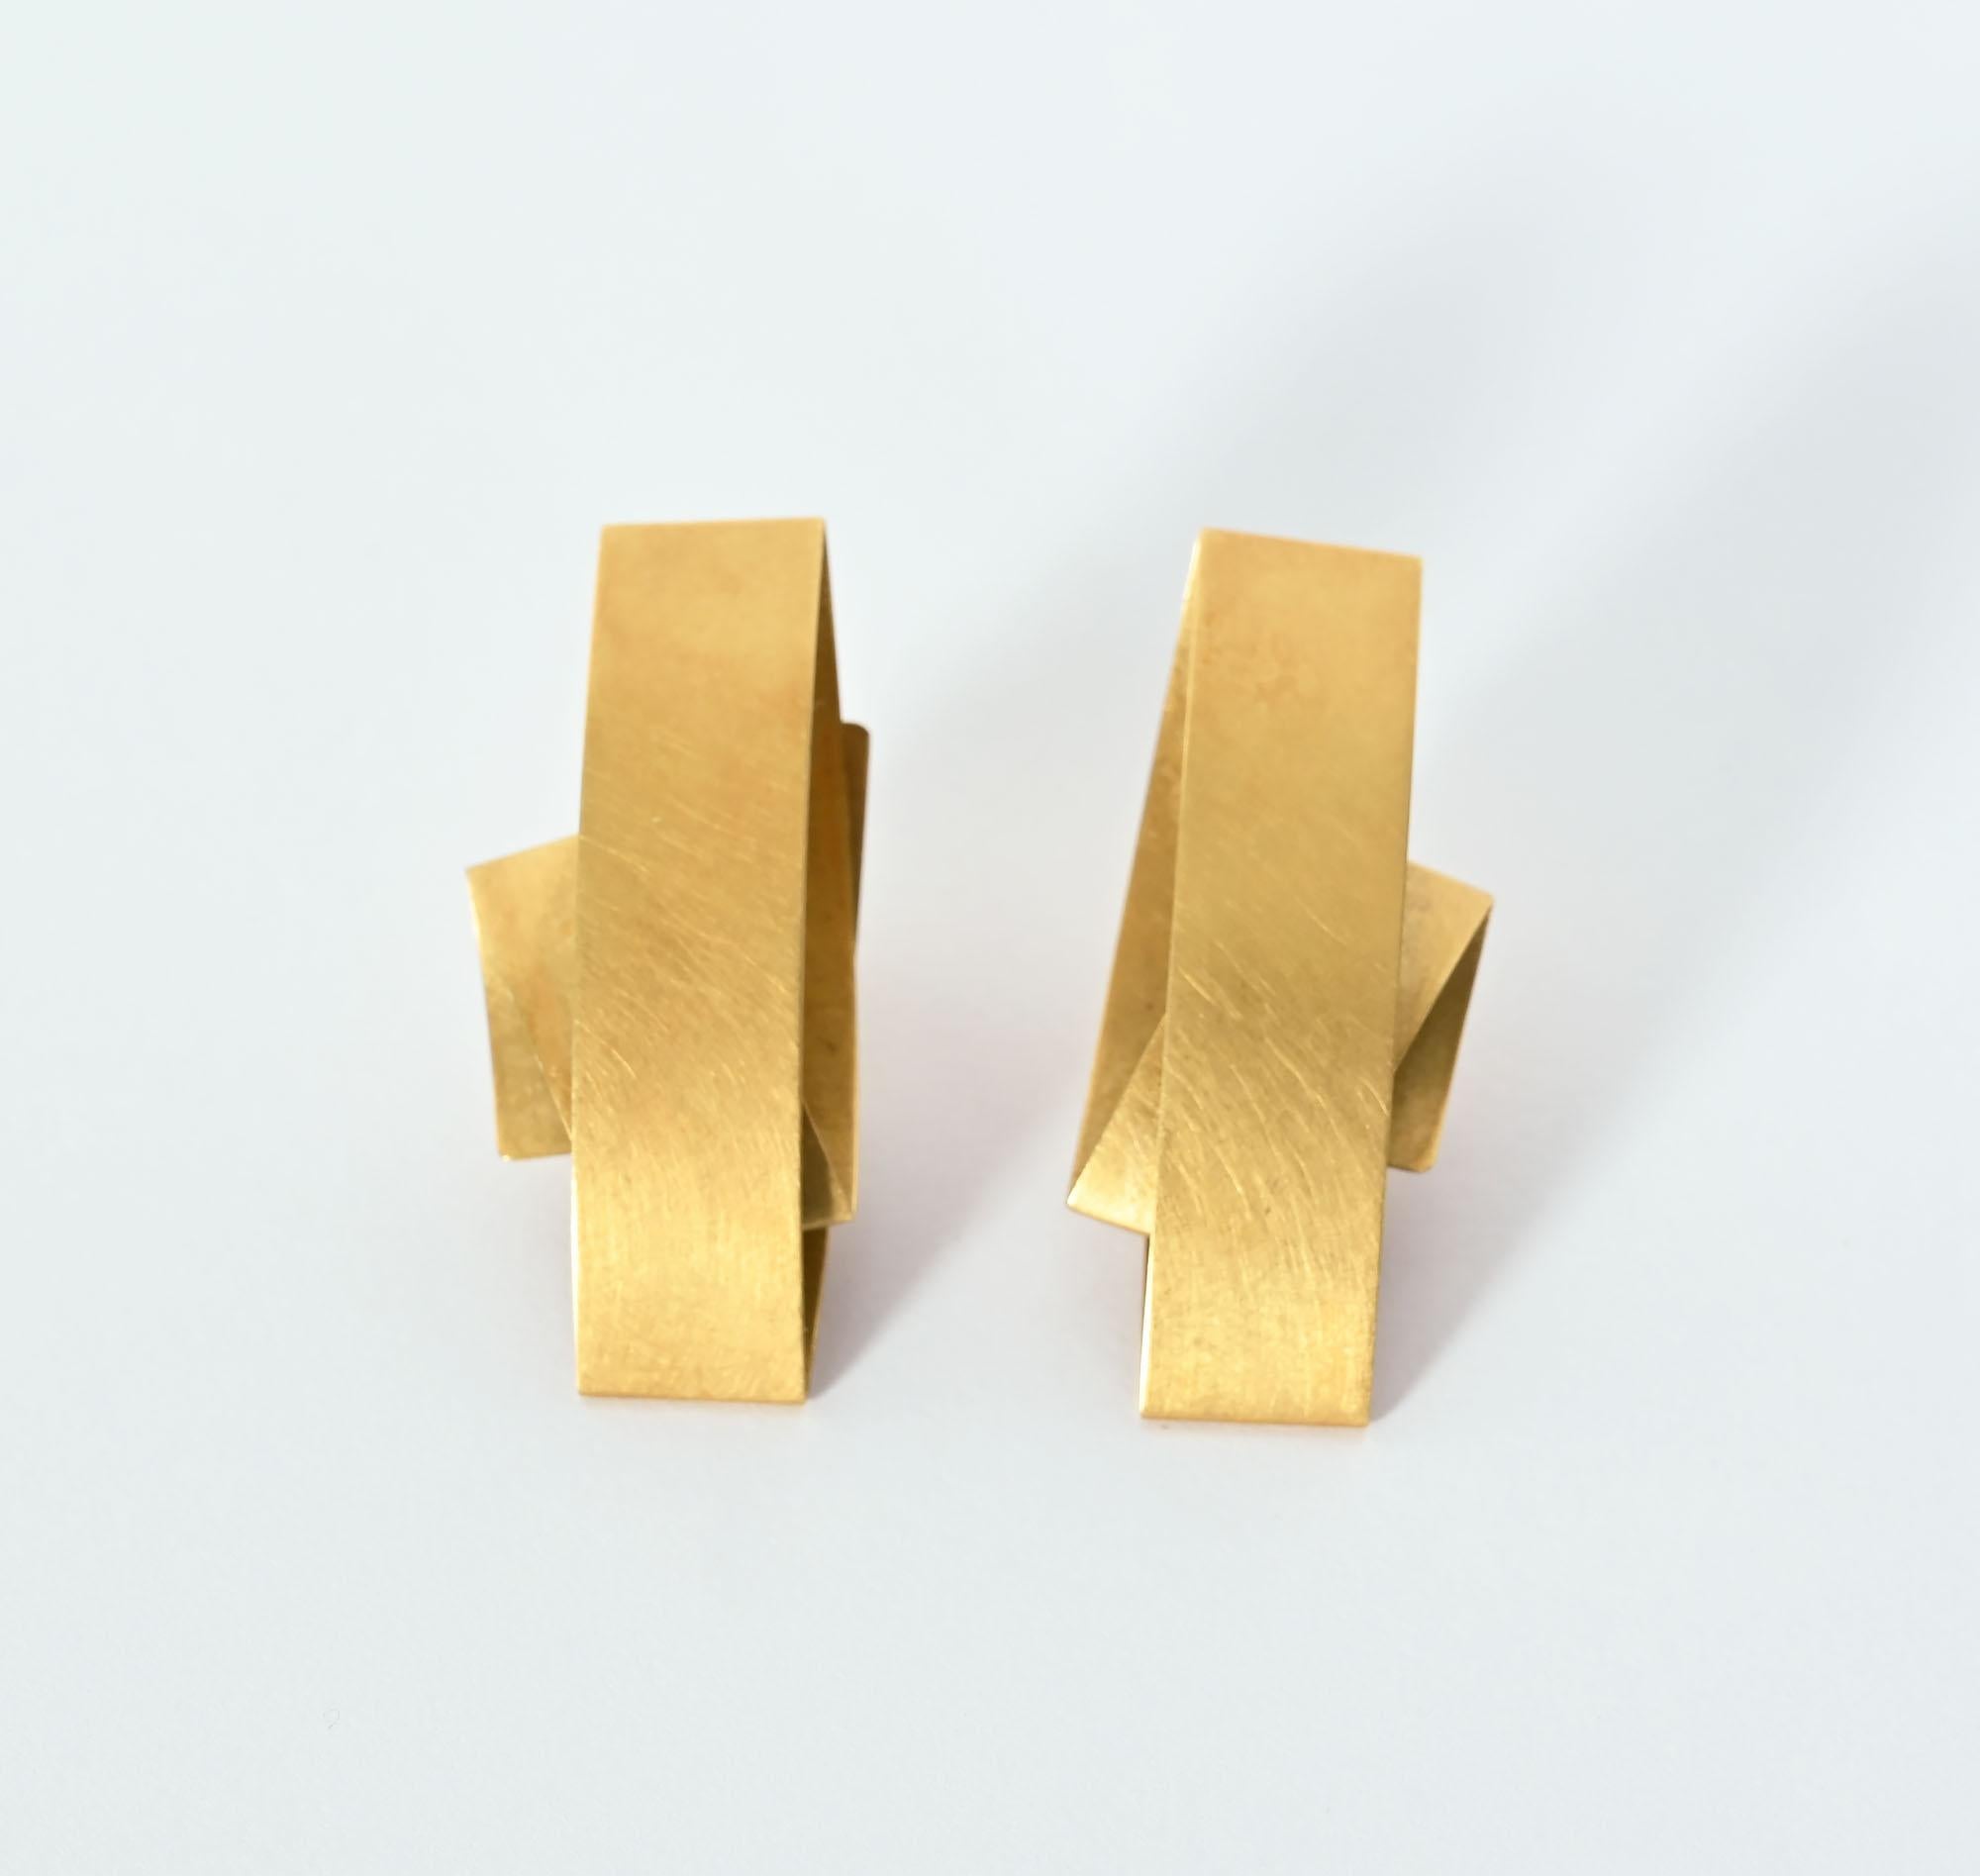 Modernist earrings by German jeweler, Niessing. The irregular folded gold has something of the look of origami, The metal has a soft brushed finish. Backs are posts. The earrings measure 3/8 inch wide and 1 1/2 inches long.